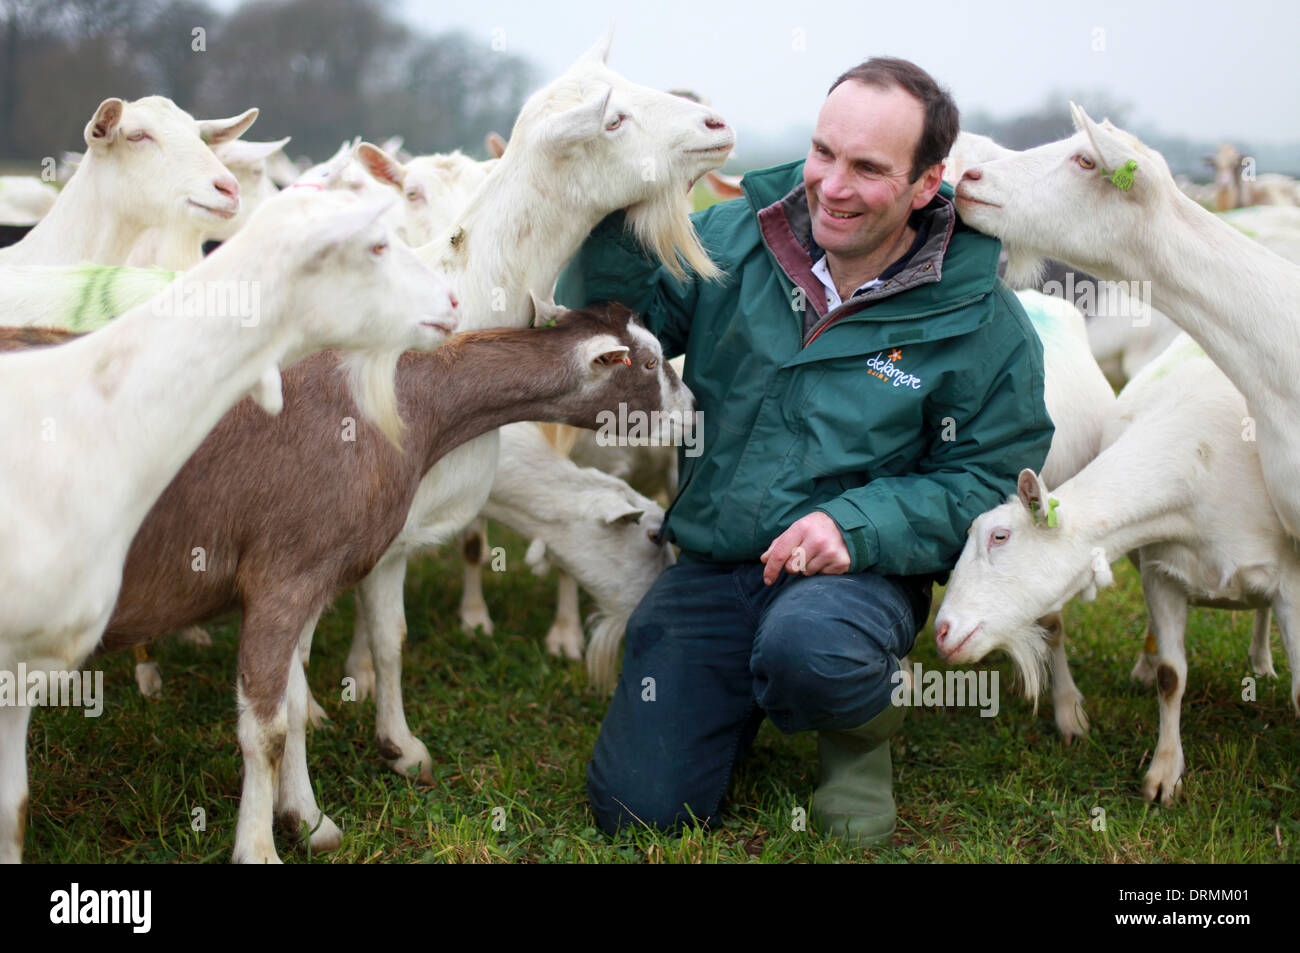 Staffordshire, UK. 12th Mar, 2012.  Nick Brandon poses with his goats.  This is the first year Britons will drink more than two million litres of goats' milk and the farmer who has Britain's largest grazing goat herd thanks the dry weather for helping to keep his goats happy and smiling.  'Goats really don't like rain - we need someone here all the time in case it rains,' said Nick Brandon, 60, who farms a huge, three thousand strong herd on his farm in Staffordshire. 'Unlike sheep, Stock Photo